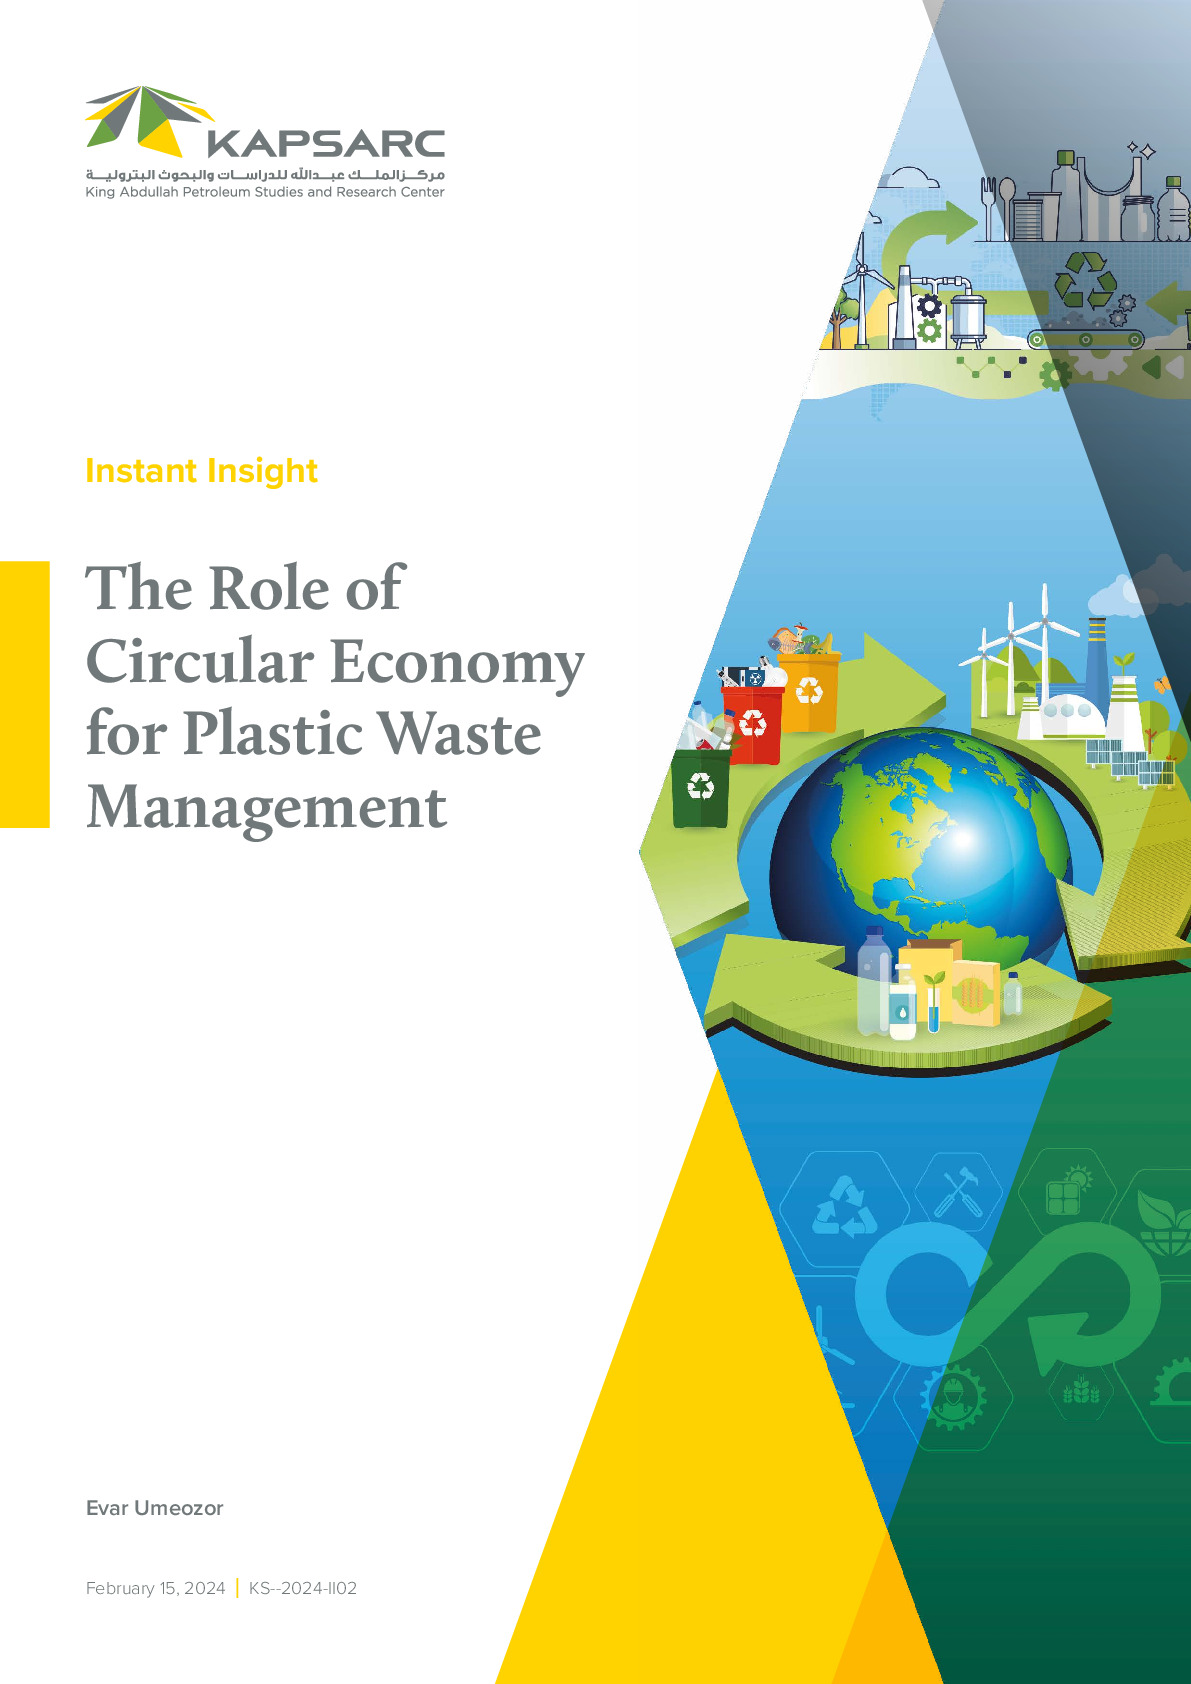 The Role of Circular Economy for Plastic Waste Management